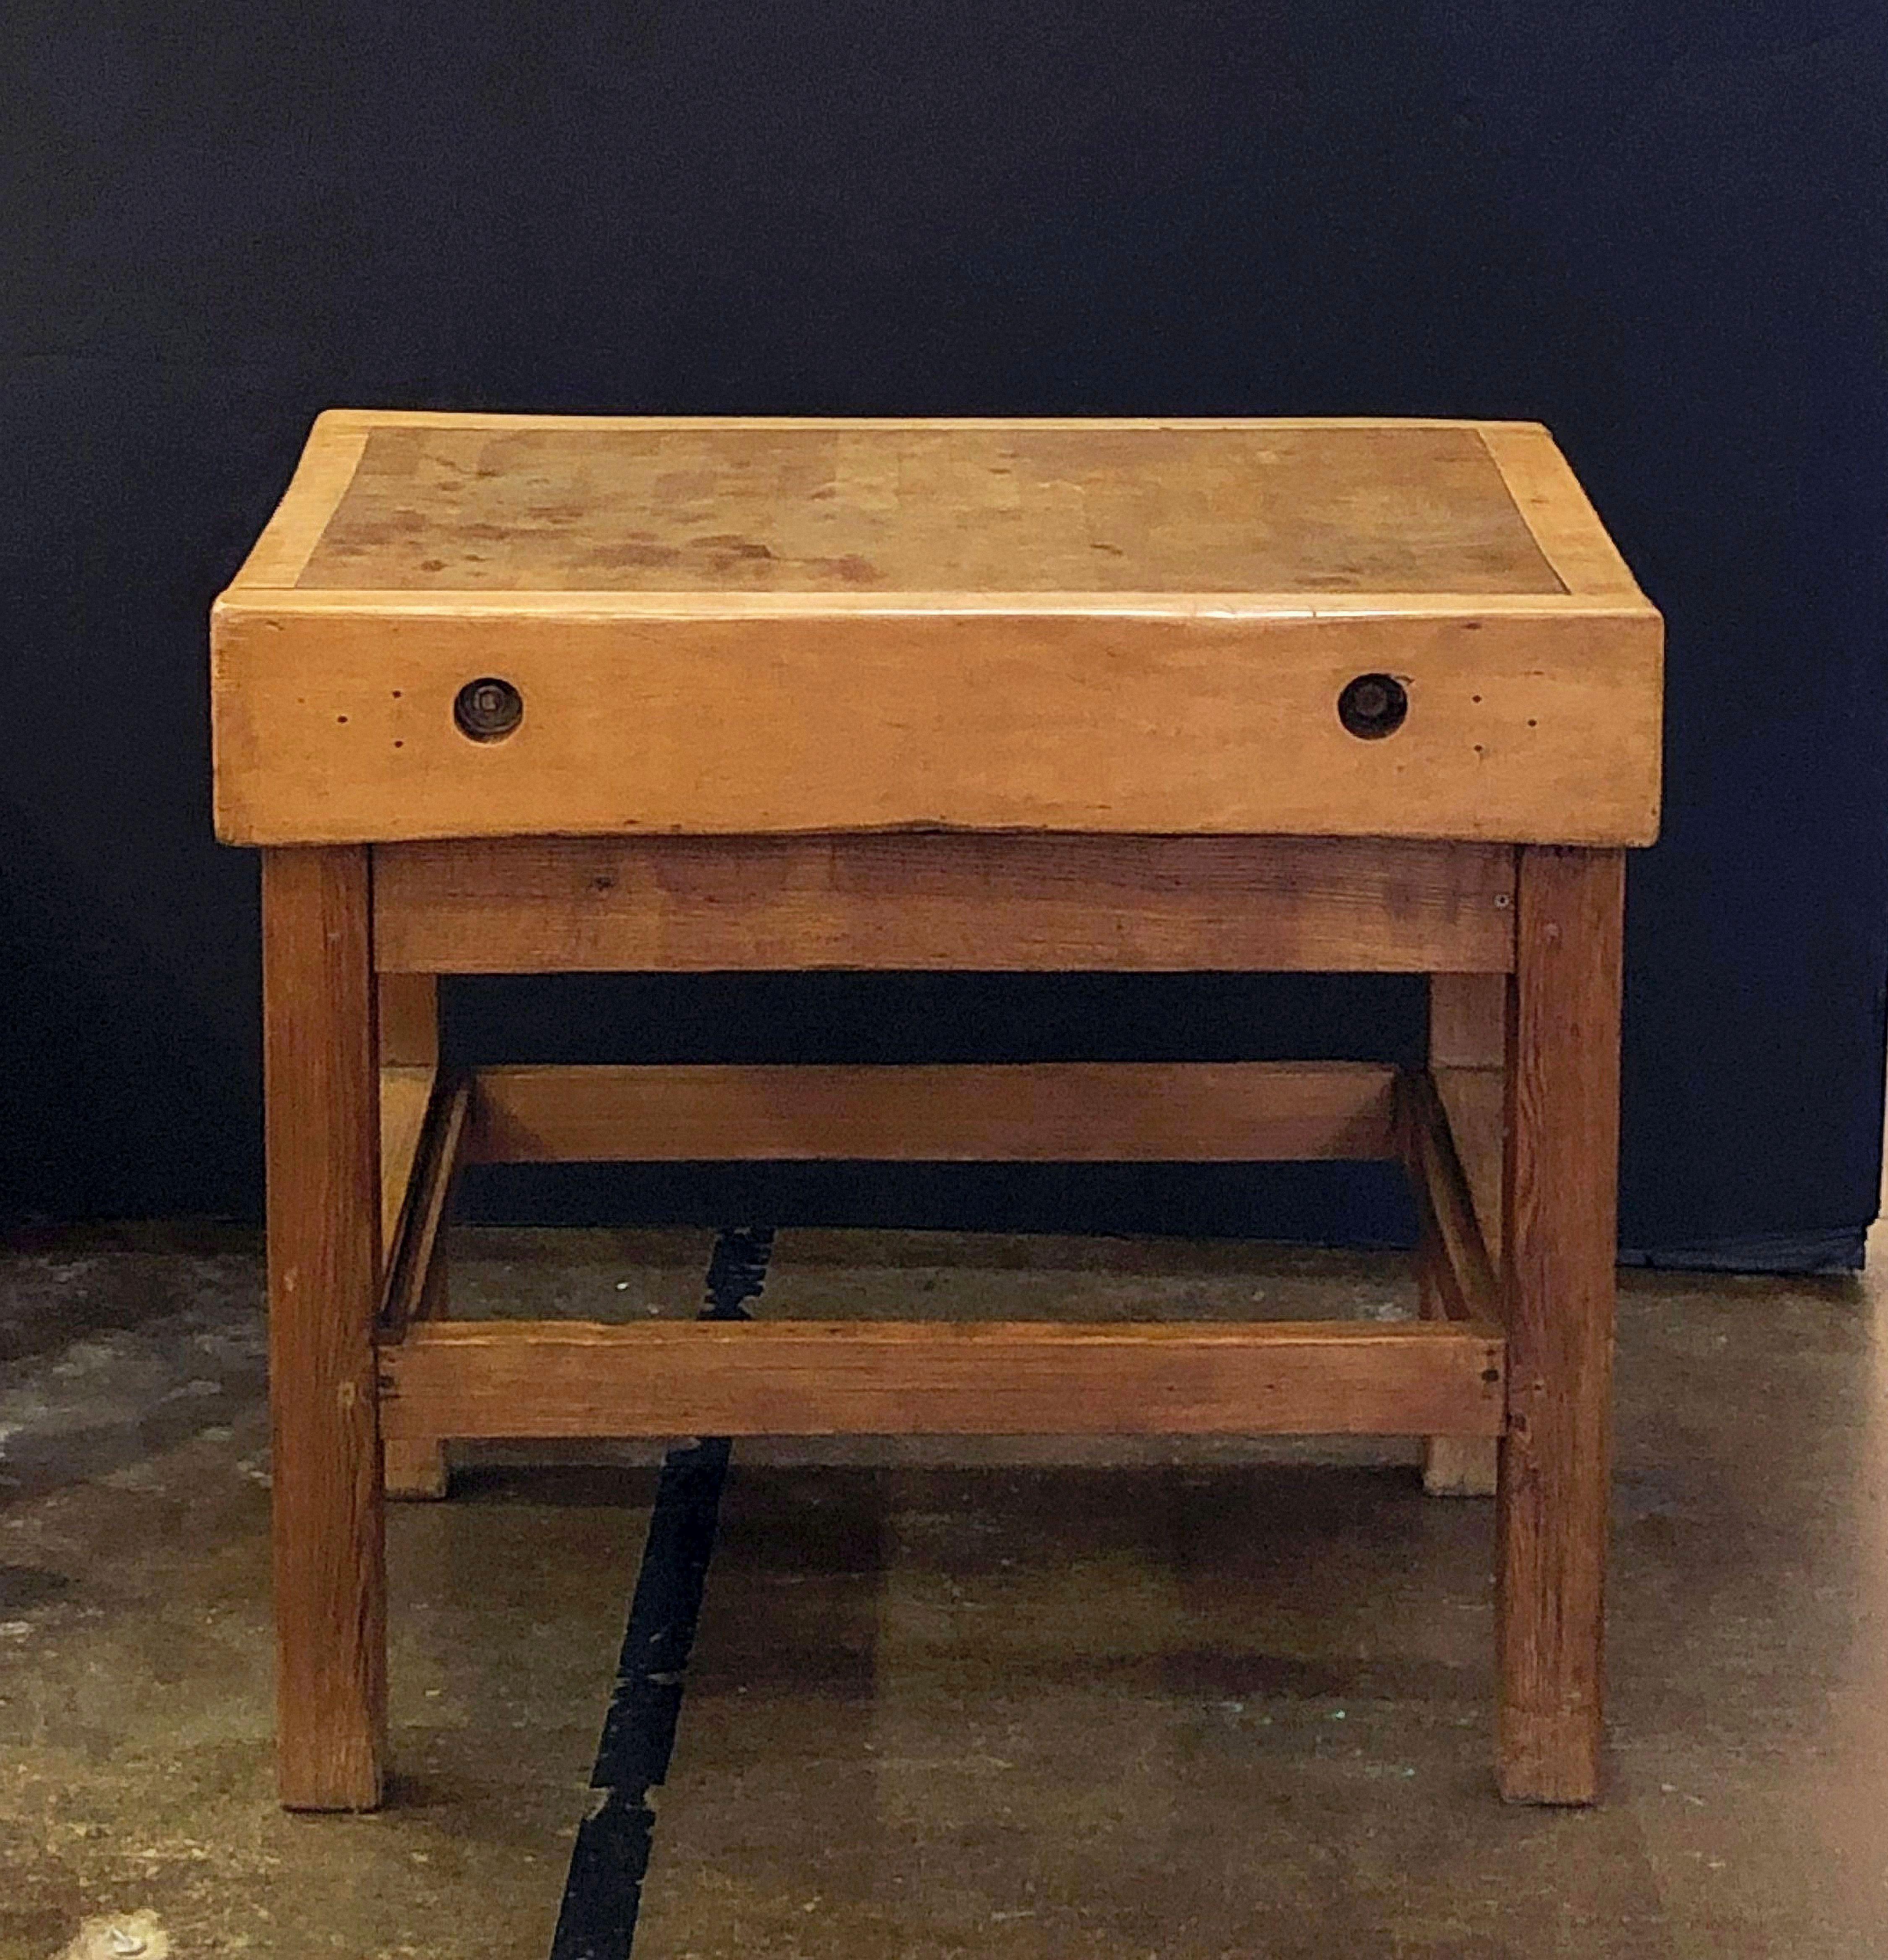 A handsome large French butcher's chopping block table, featuring a large, rectangular block or slab of wood set upon a bottom tier four-legged support stand. Ships in two pieces.

Makes a great kitchen island or serving console.